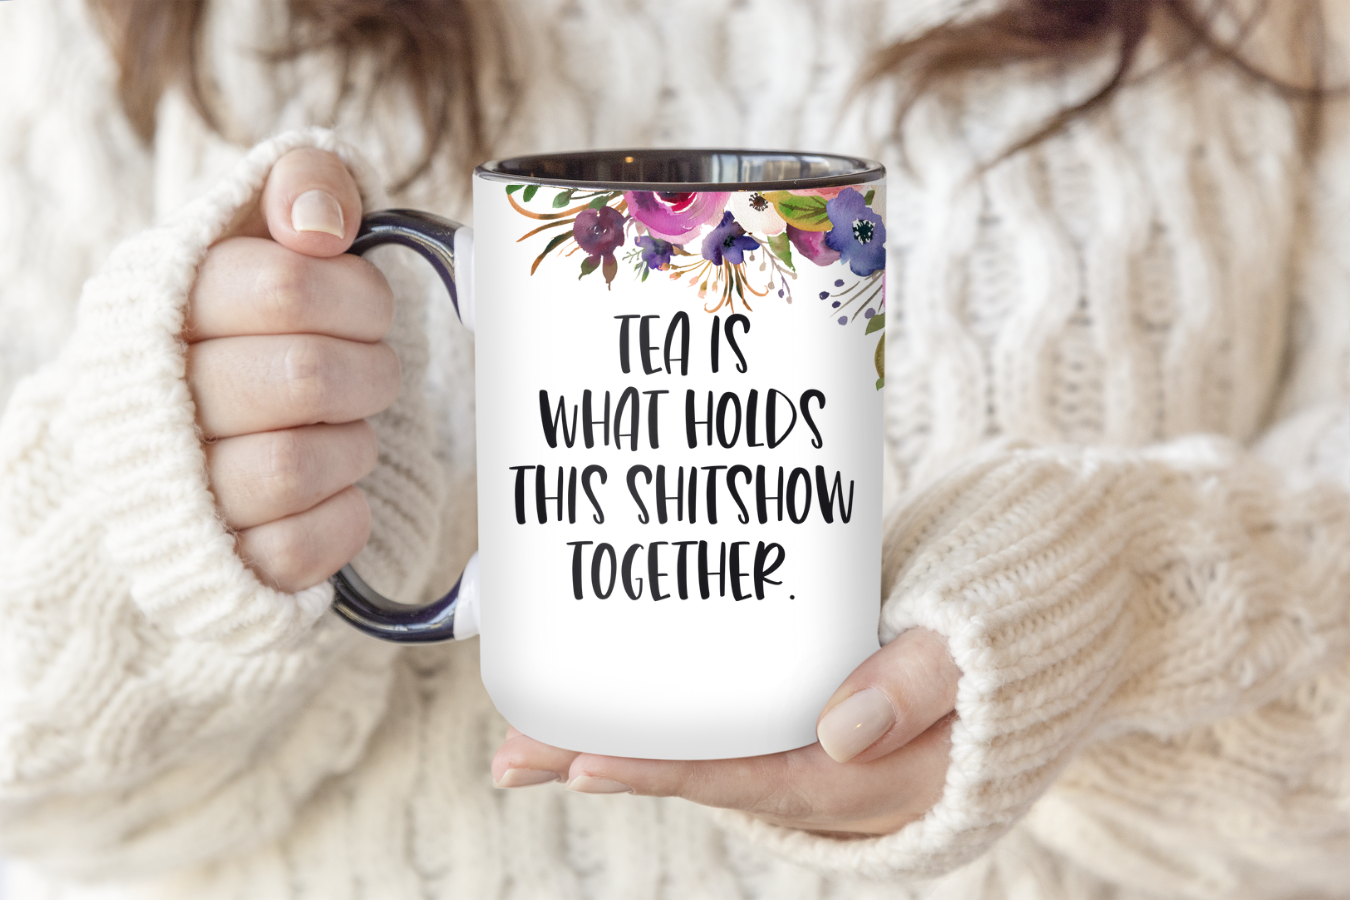 Tea Is What Holds This Shitshow Together | Mug - The Pretty Things.ca